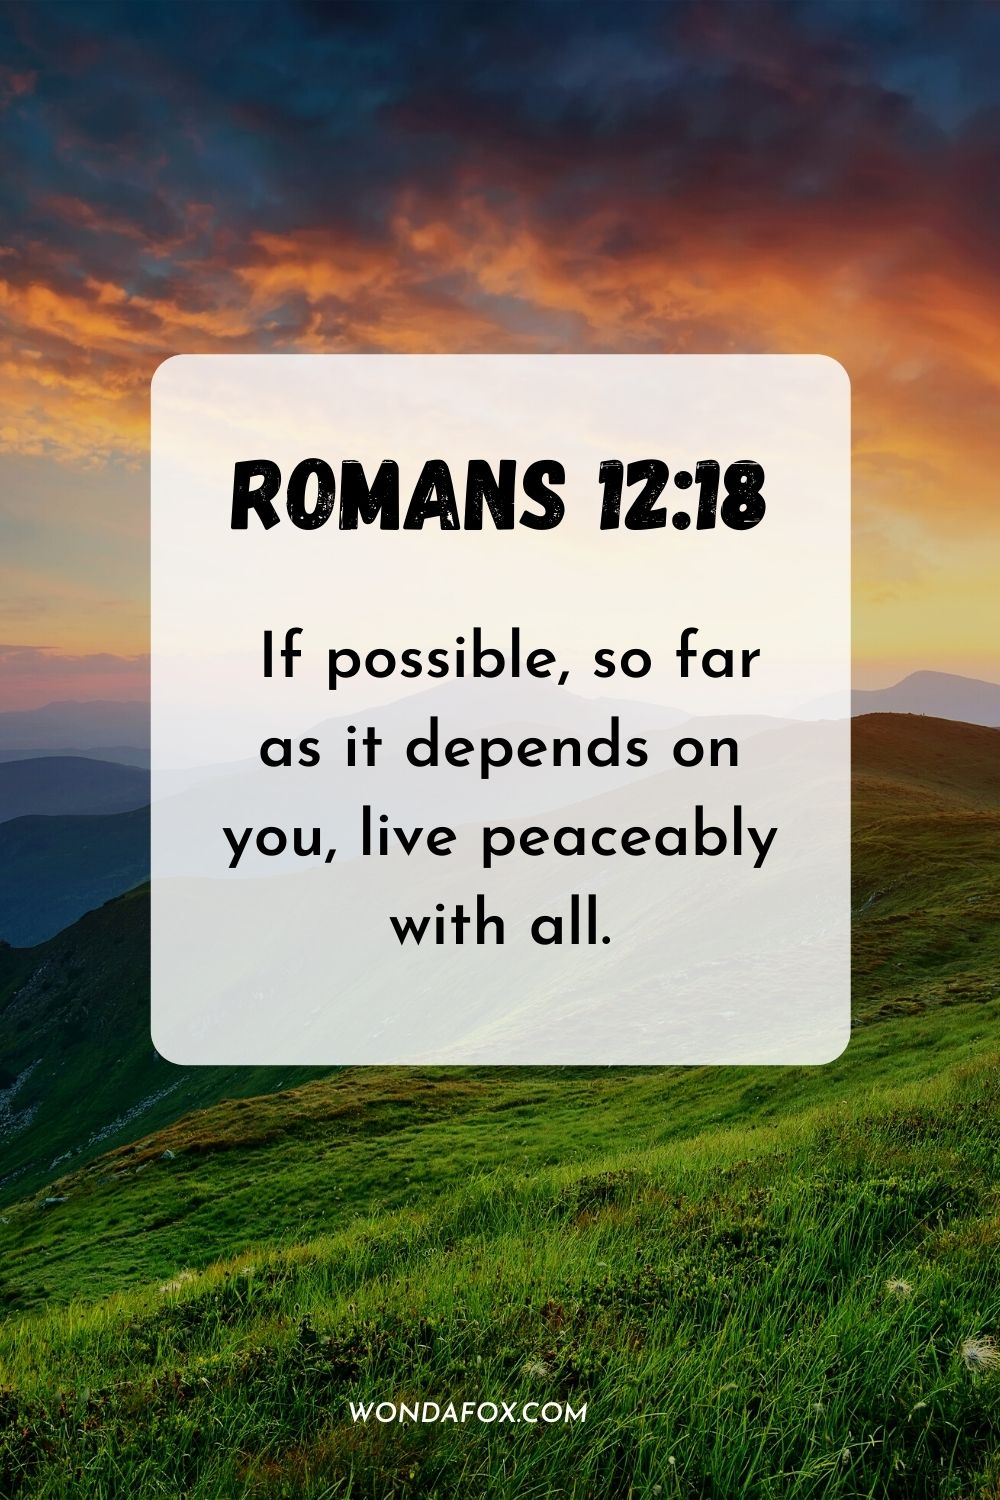  If possible, so far as it depends on you, live peaceably with all. Romans 12:18